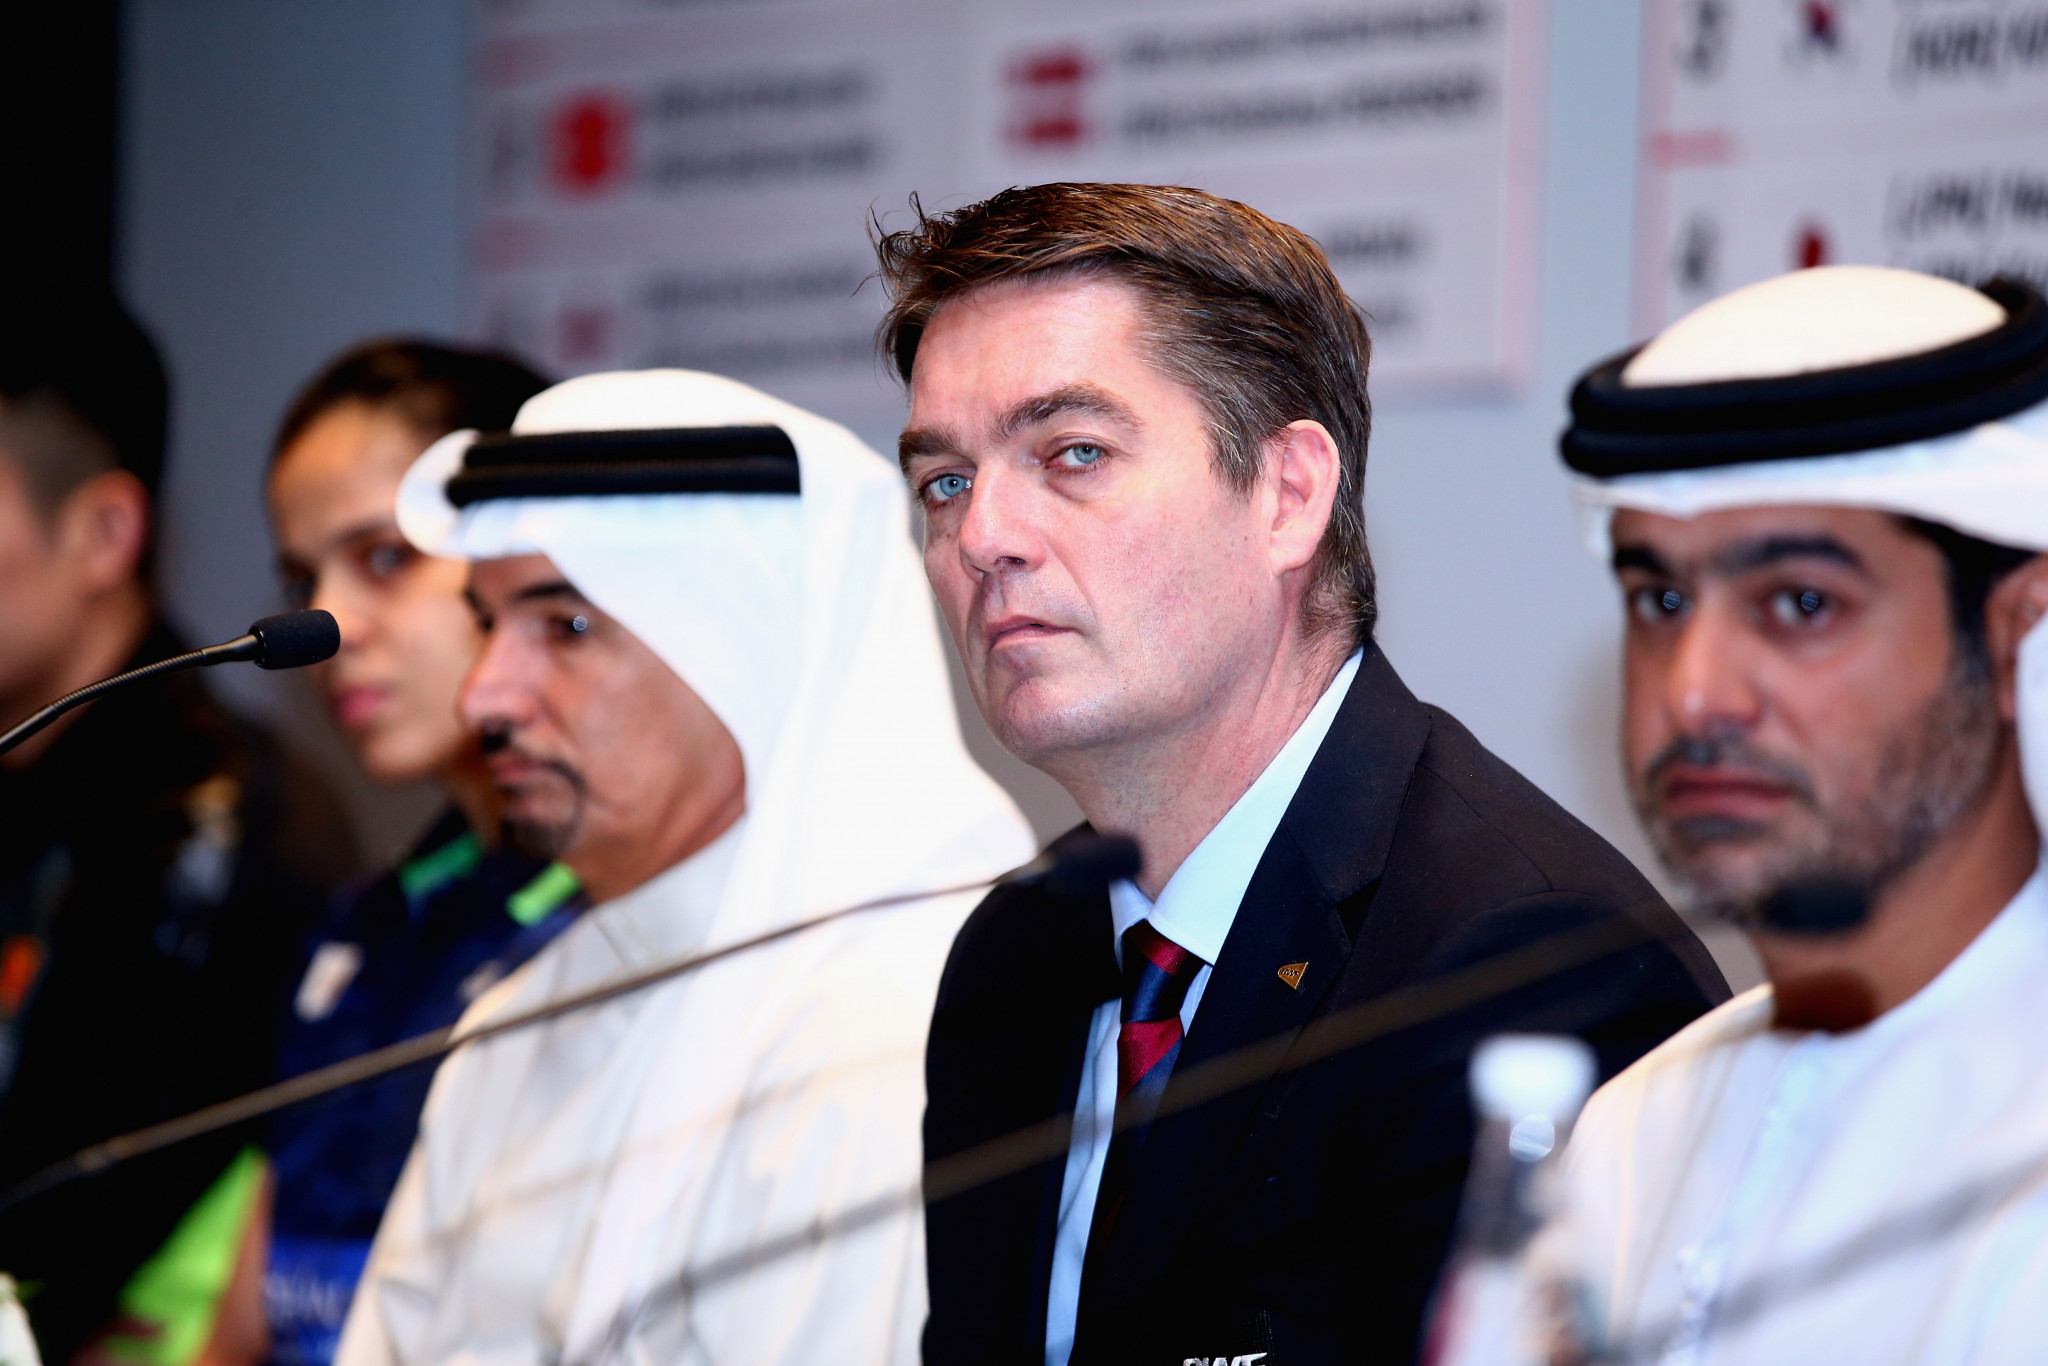 BWF President Poul-Erik Høyer said he had full trust in the officials elected at the BWF Annual General Assembly in Nanning ©Getty Images